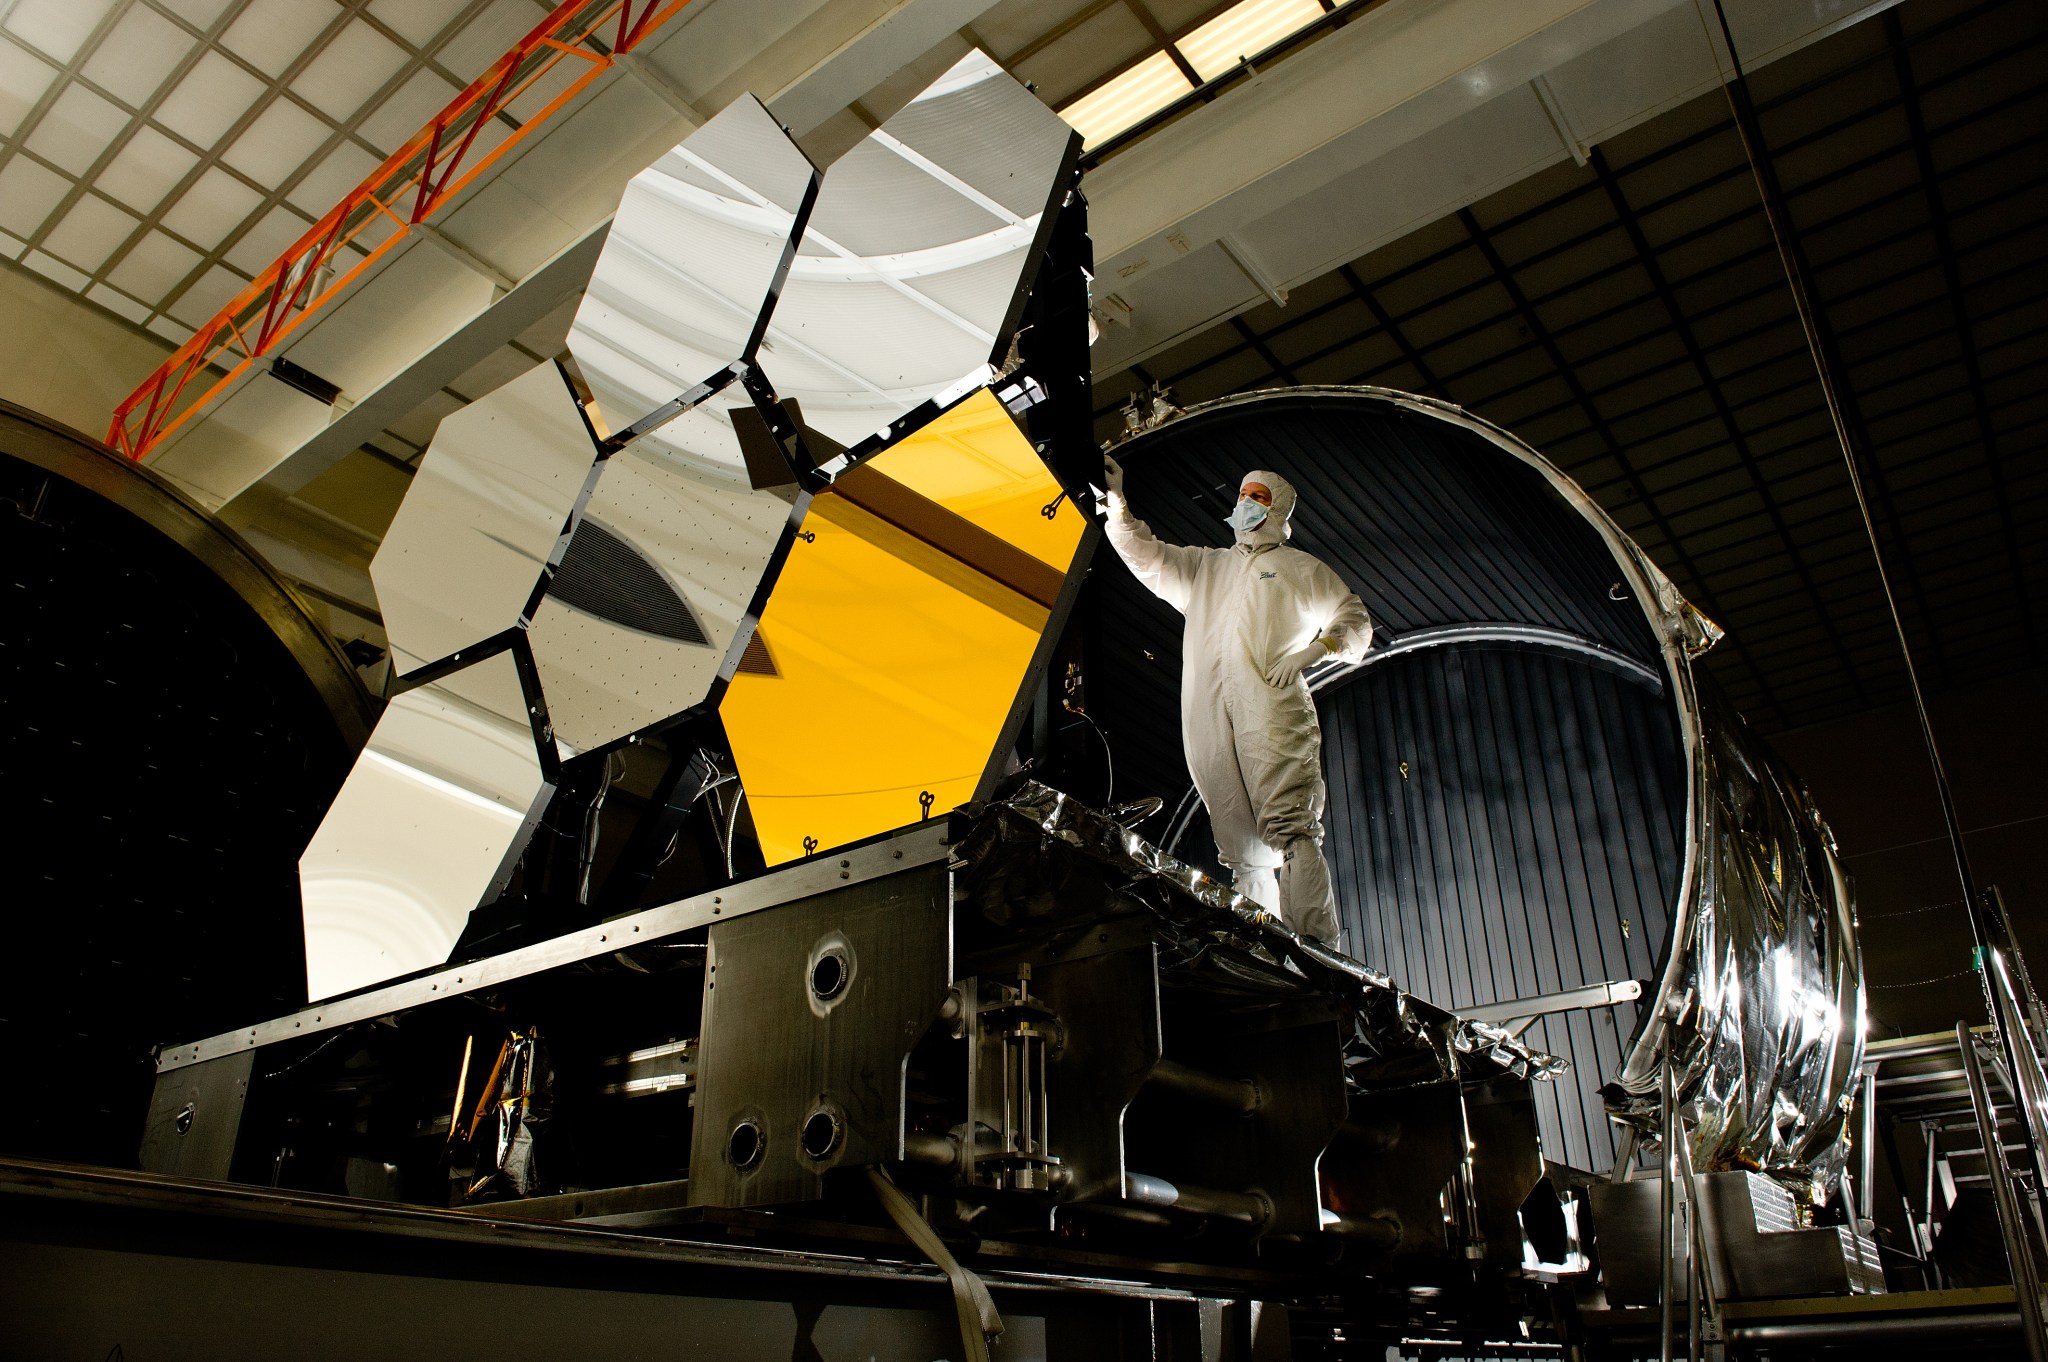 Ball Aerospace lead optical test engineer Dave Chaney inspects six primary mirror segments, critical elements of the James Webb Space Telescope, prior to cryogenic testing in the X-ray & Cryogenic Facility at Marshall Space Flight Center